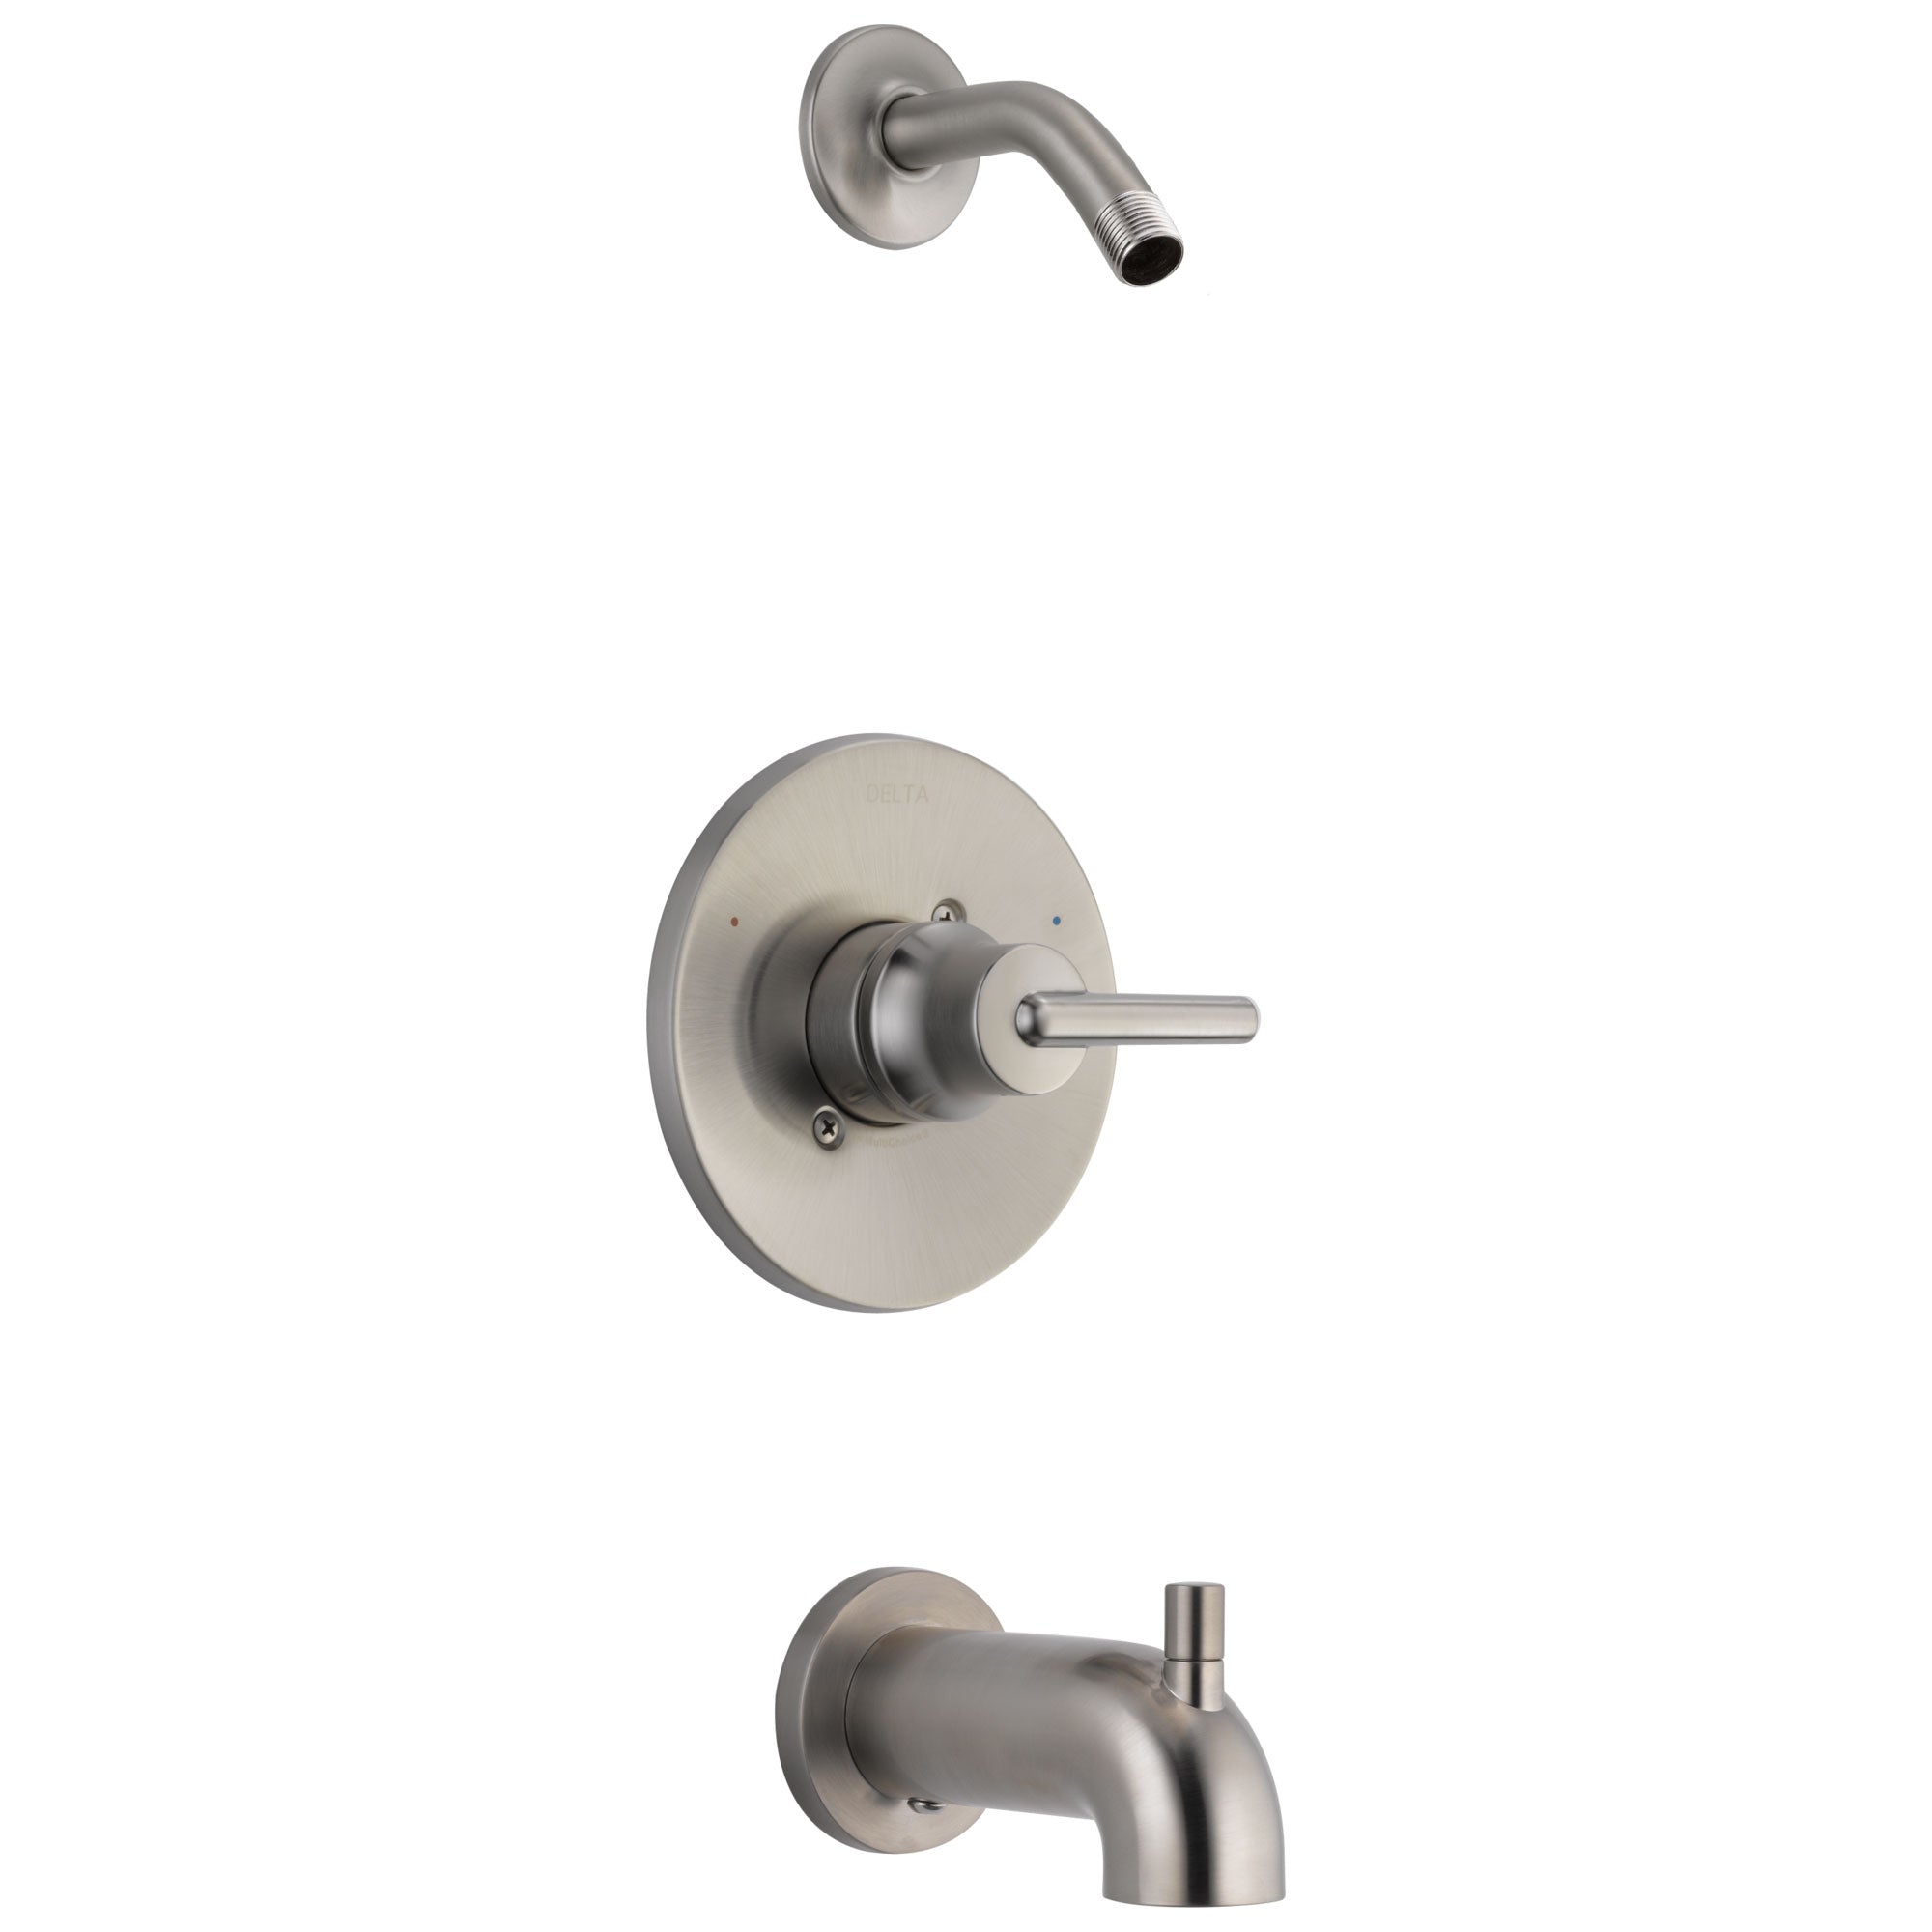 Delta Trinsic Collection Stainless Steel Finish Modern Lever Tub and Shower Combination Faucet Trim - Less Showerhead Includes Valve with Stops D2396V